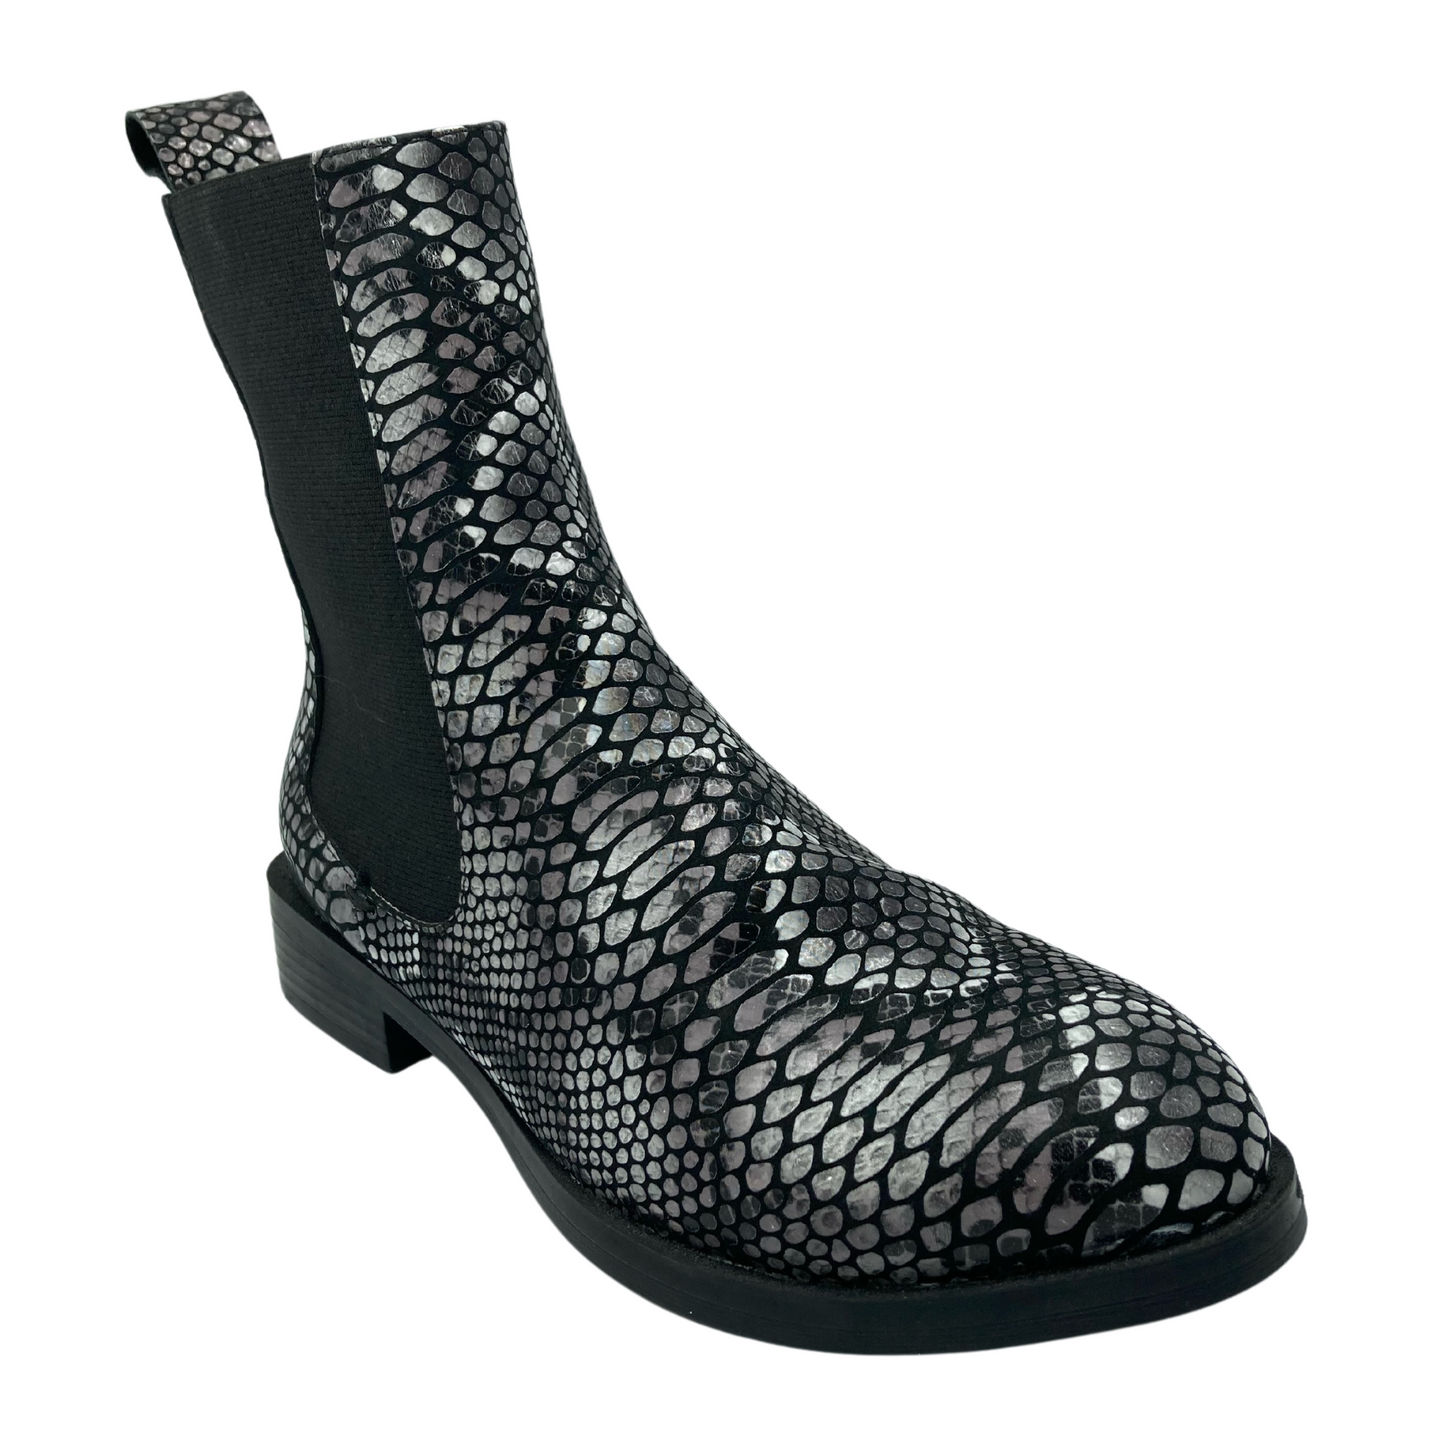 45 degree angled view of leather snake print short boot with block heel and elastic side gore